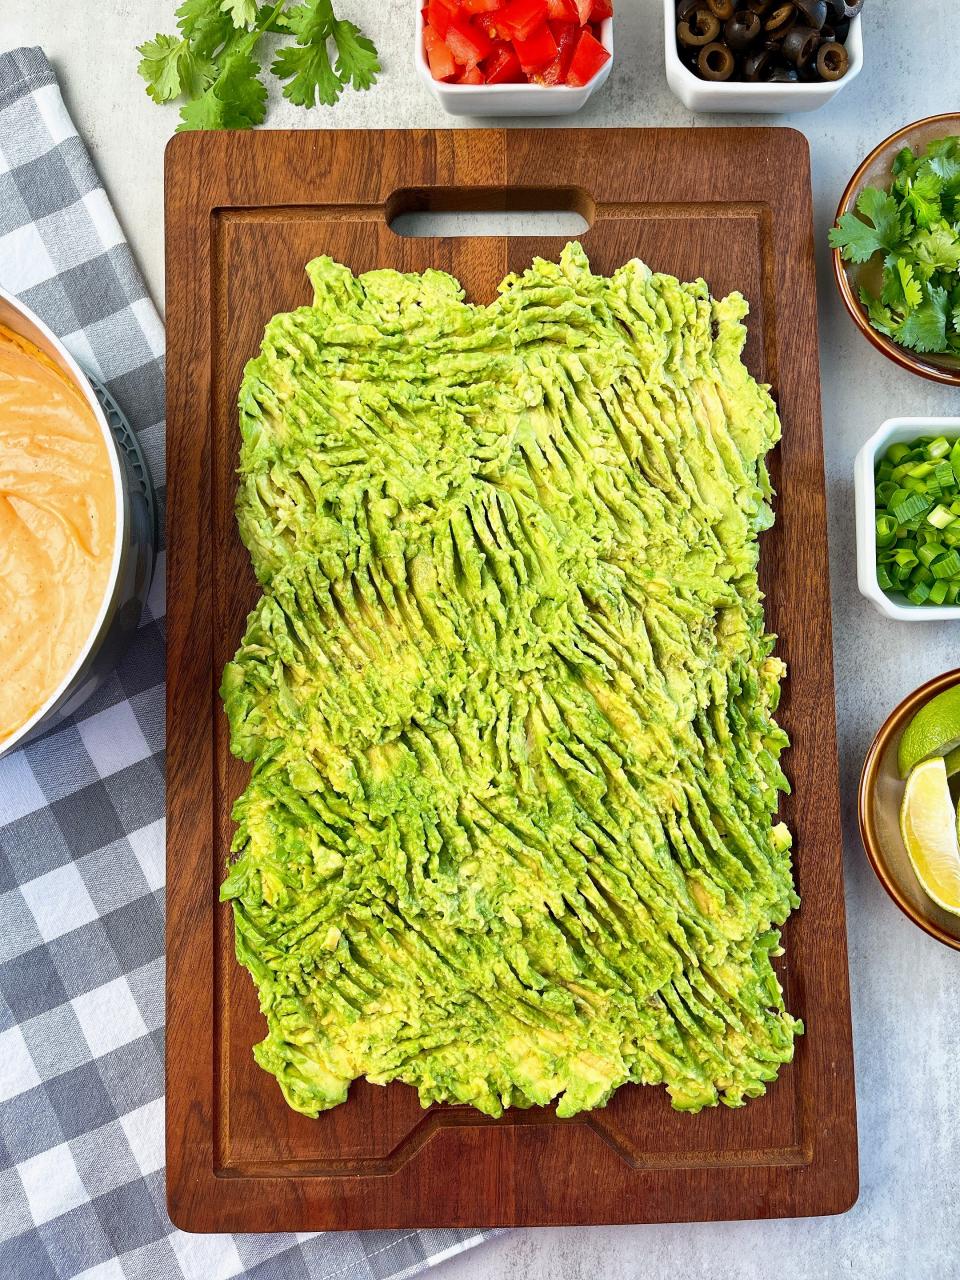 Smashed avocado is the base of your dip board.